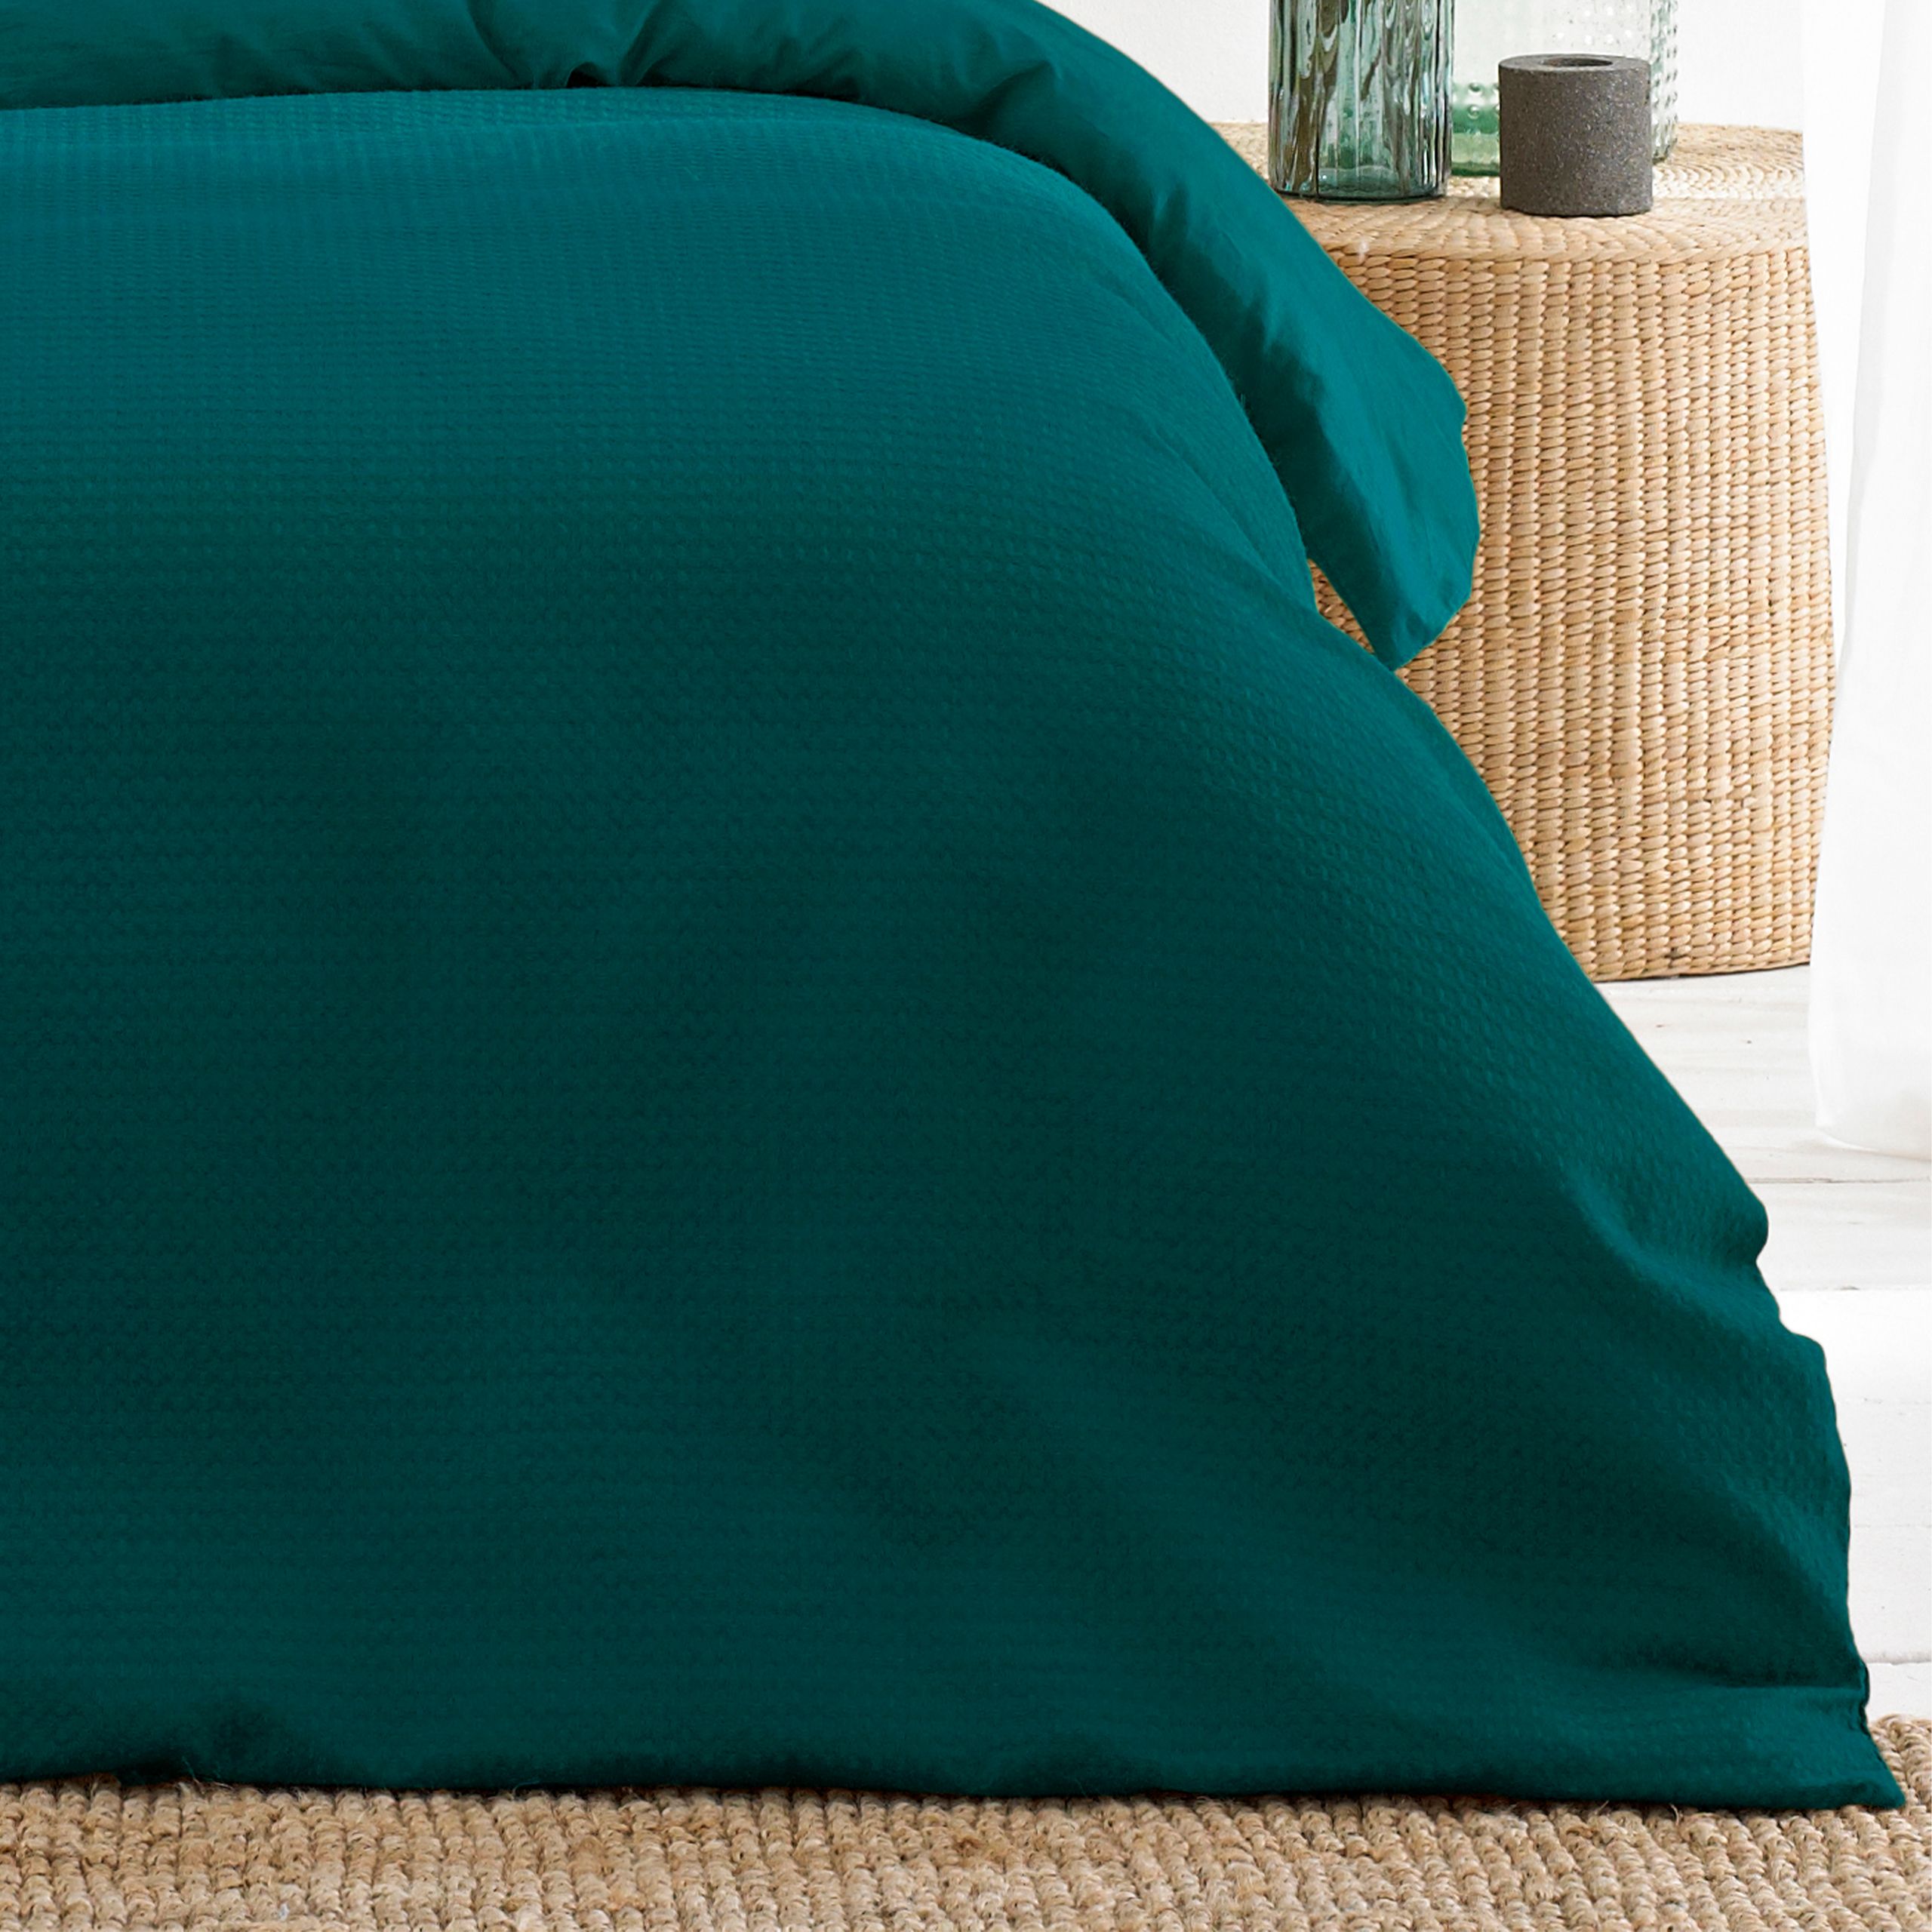 The Waffle duvet set is made of 100% soft cotton, woven on a loom making it a very durable fabric. It’s unique three dimensional design gives it a large surface area to keep you snug and warm on cold evenings while also being breathable for warmer weather. This full bodied duvet set comes with large matching pillowcases complete with an oxford border for that extra touch of luxury. The duvet cover set has a secure button closure while the pillowcases feature a simple envelope closure to keep your pillow safely in place. For the best finish machine wash at 40 degrees. Tumble dry on a low setting and use a hot iron.